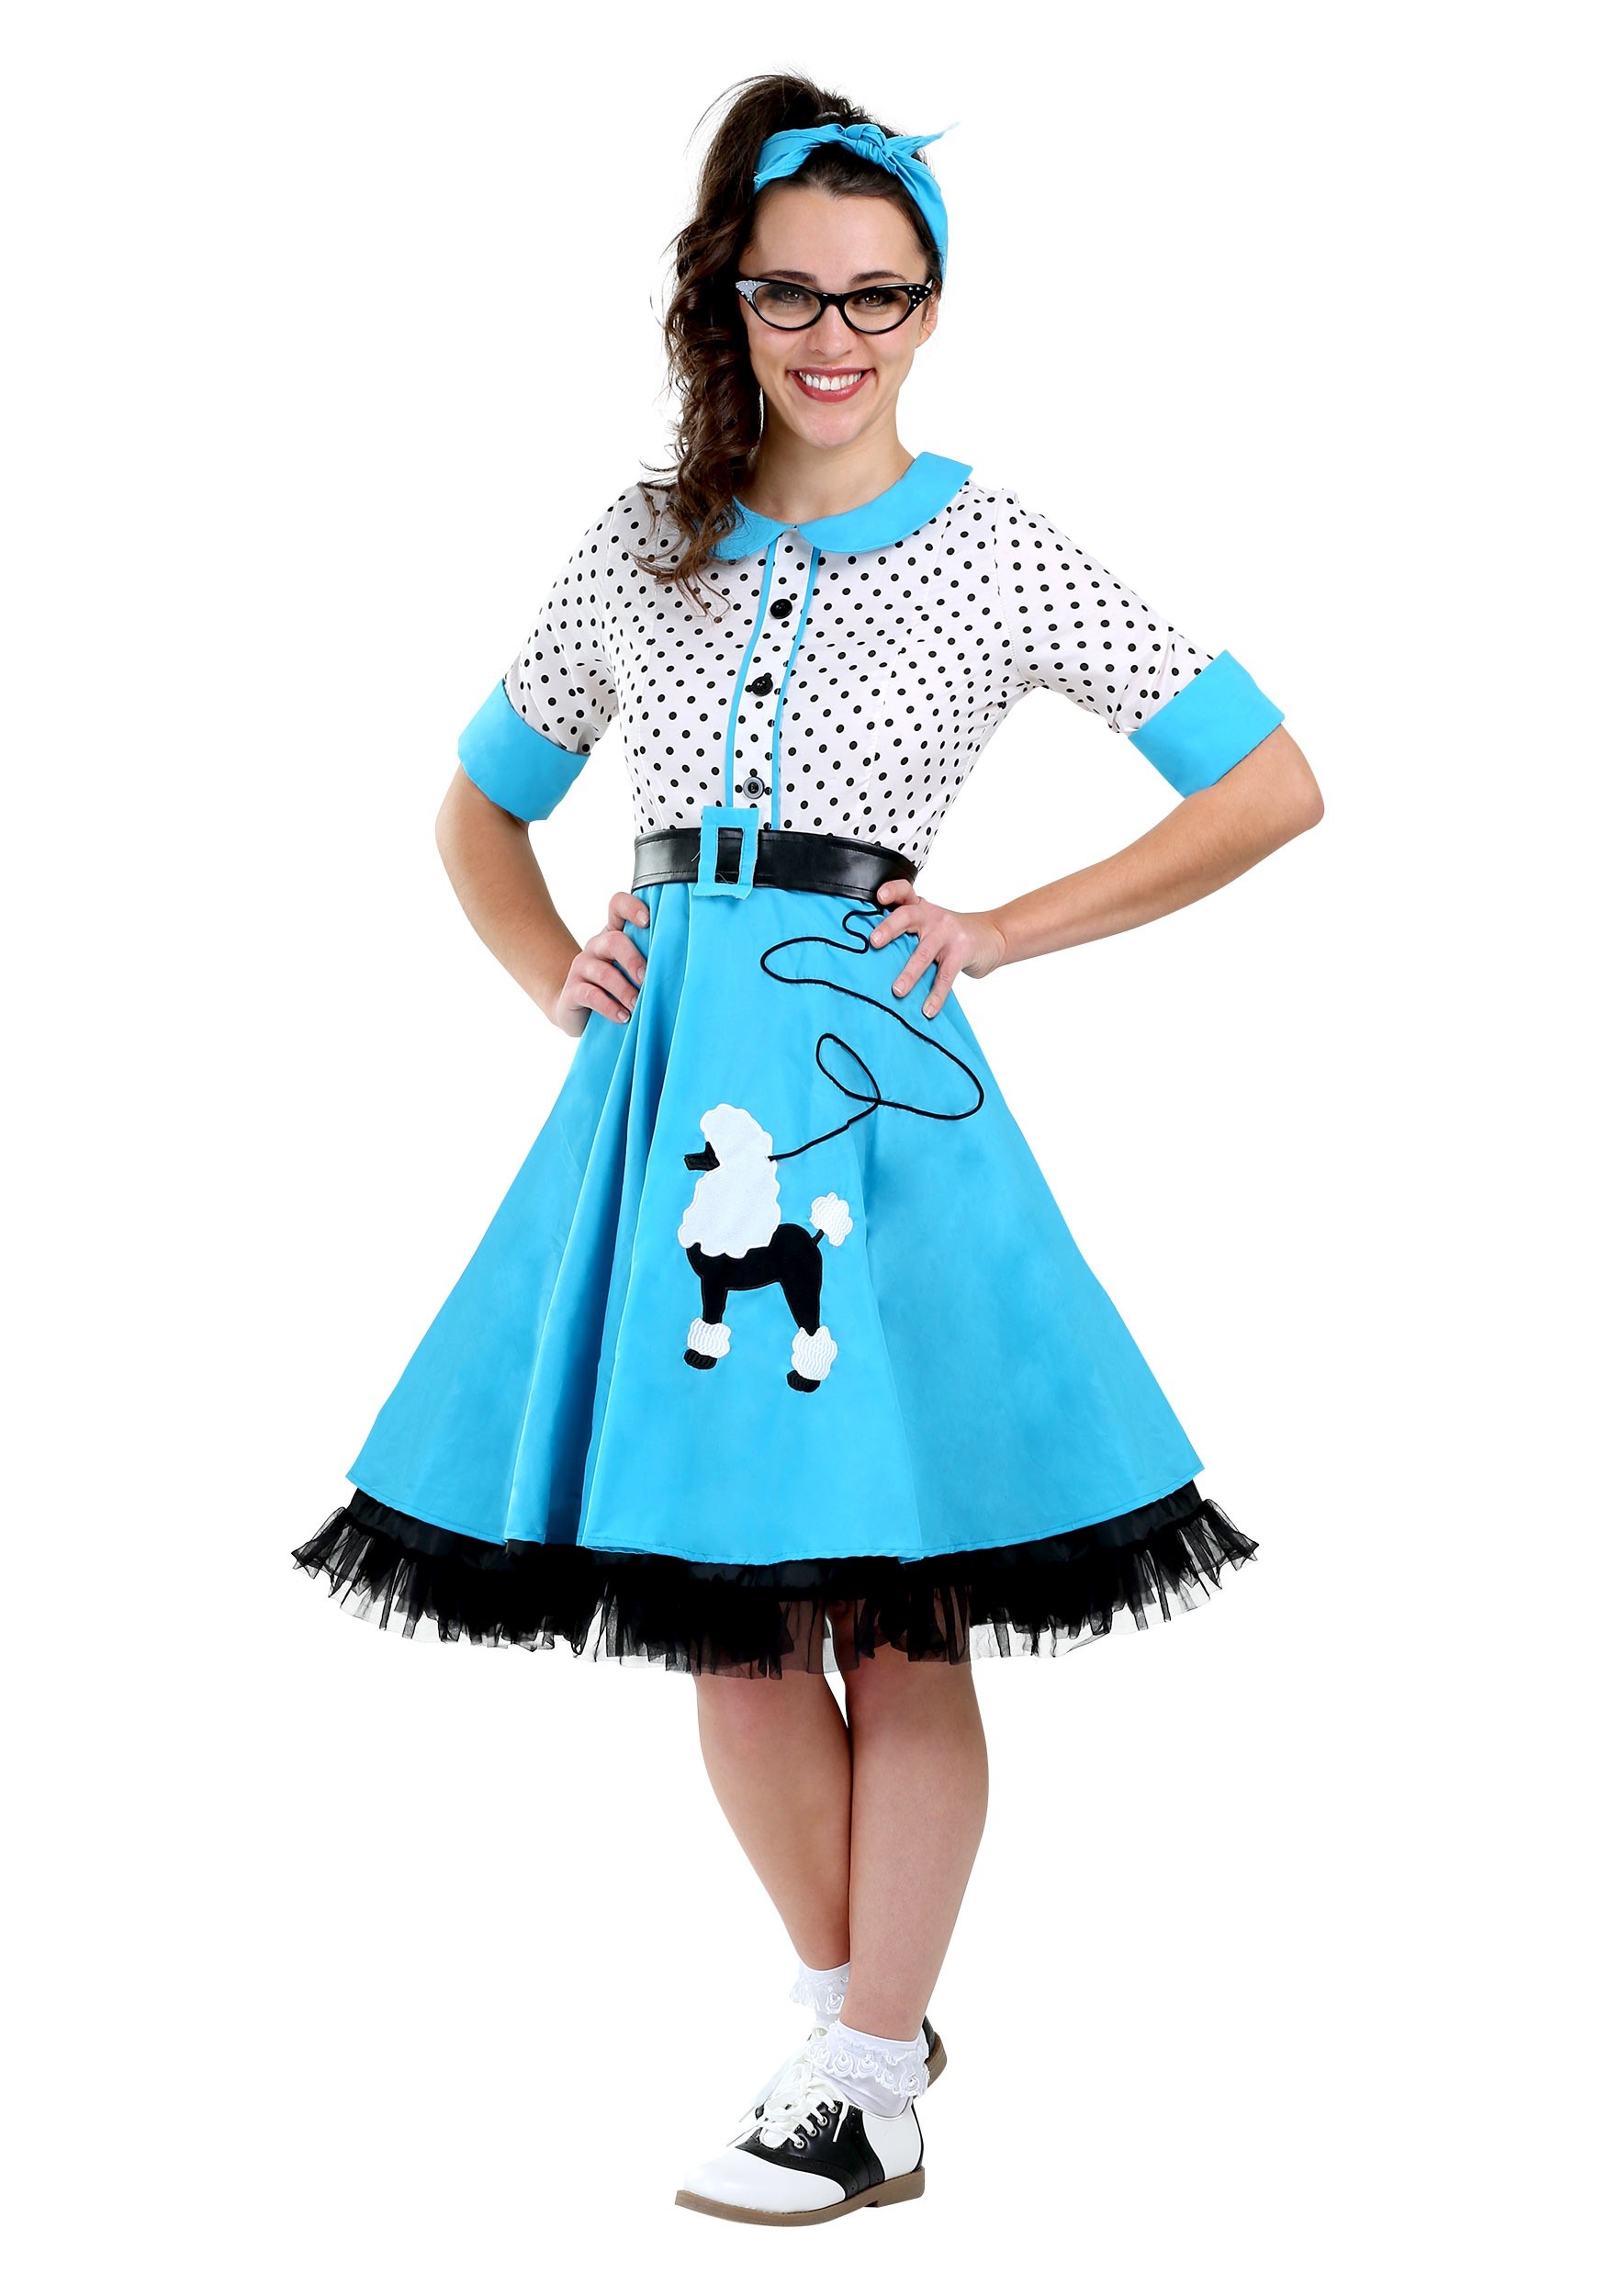 Checkered Cutie Women's Adult 50s Poodle Skirt Costume-XS/S 